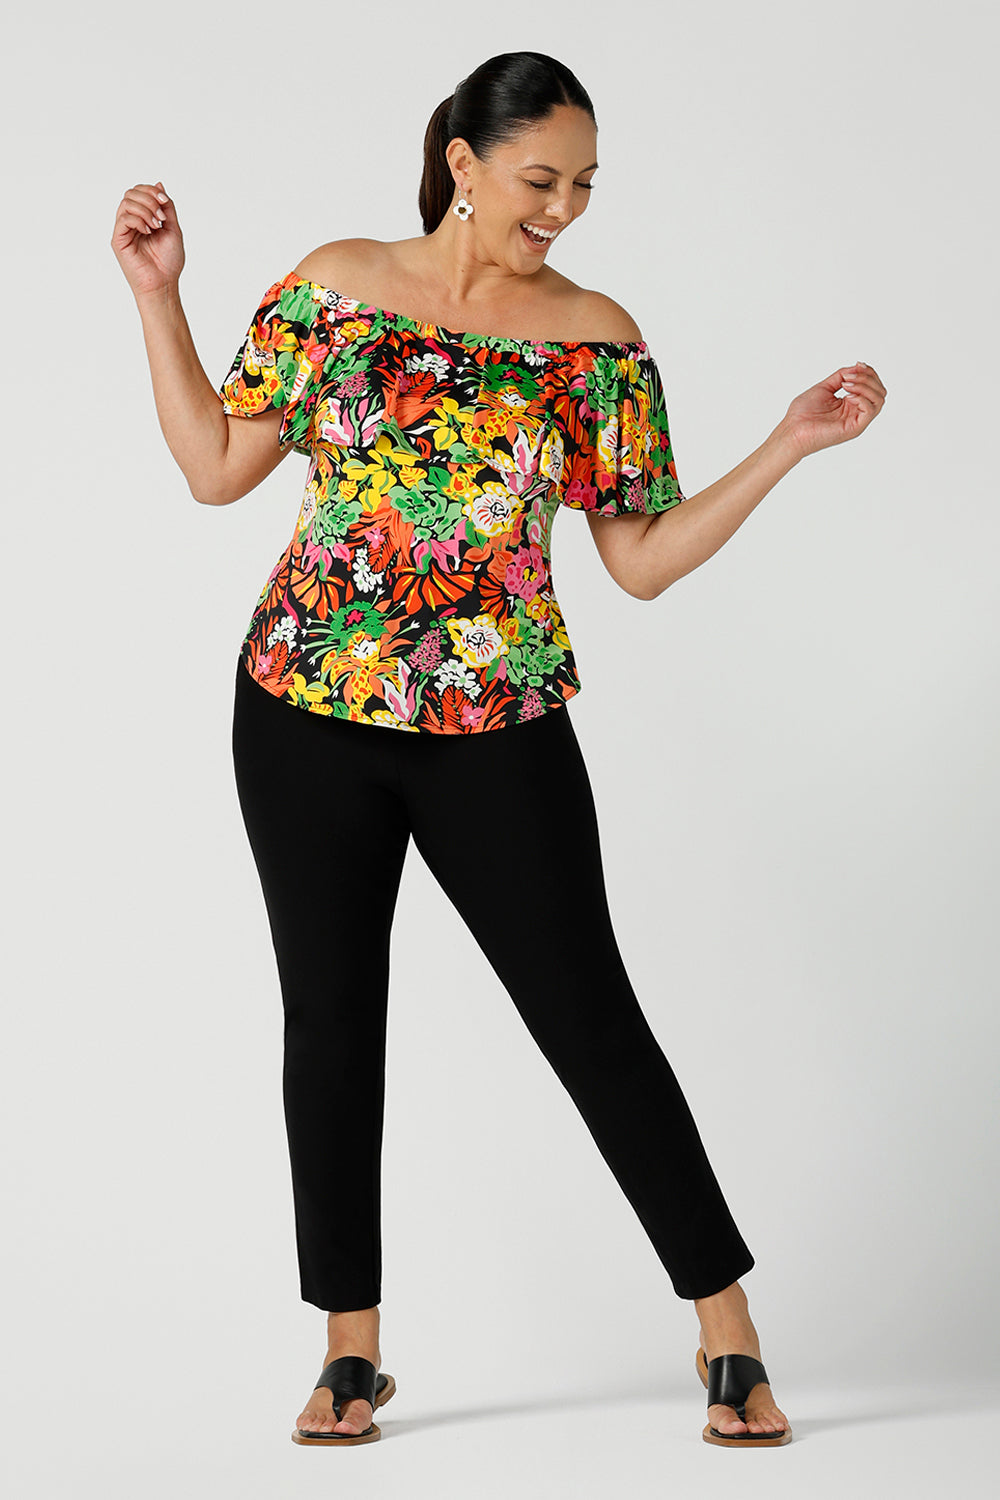 Happy woman wears a size 12 off shoulder ruffle Briar top in the Cancun print.  A bright and colourful pop of green, pink, orange and yellow floral print. Styled back with black work pants. A versatile top for the summer season, wear this top 3 ways. Designed and made in Australia sizes 8-24.